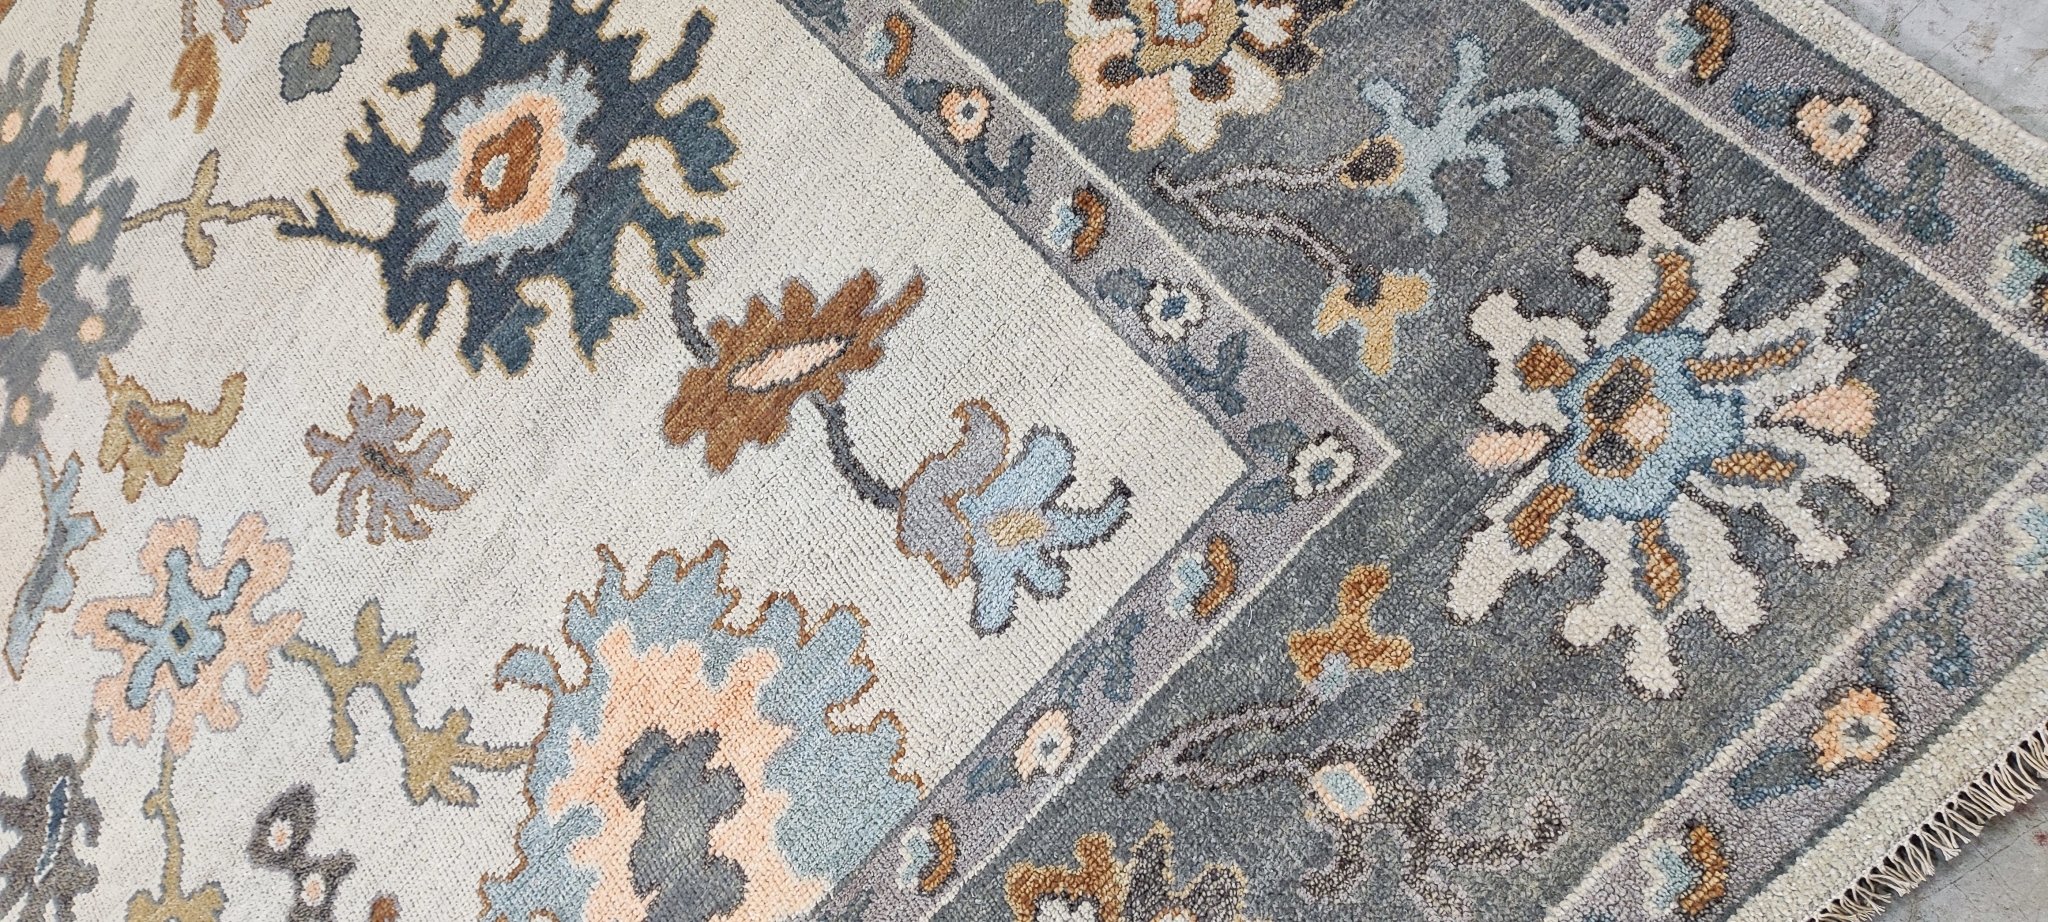 Celerie Kemble Ivory and Grey Hand-Knotted Oushak Rug 9x12 | Banana Manor Rug Company